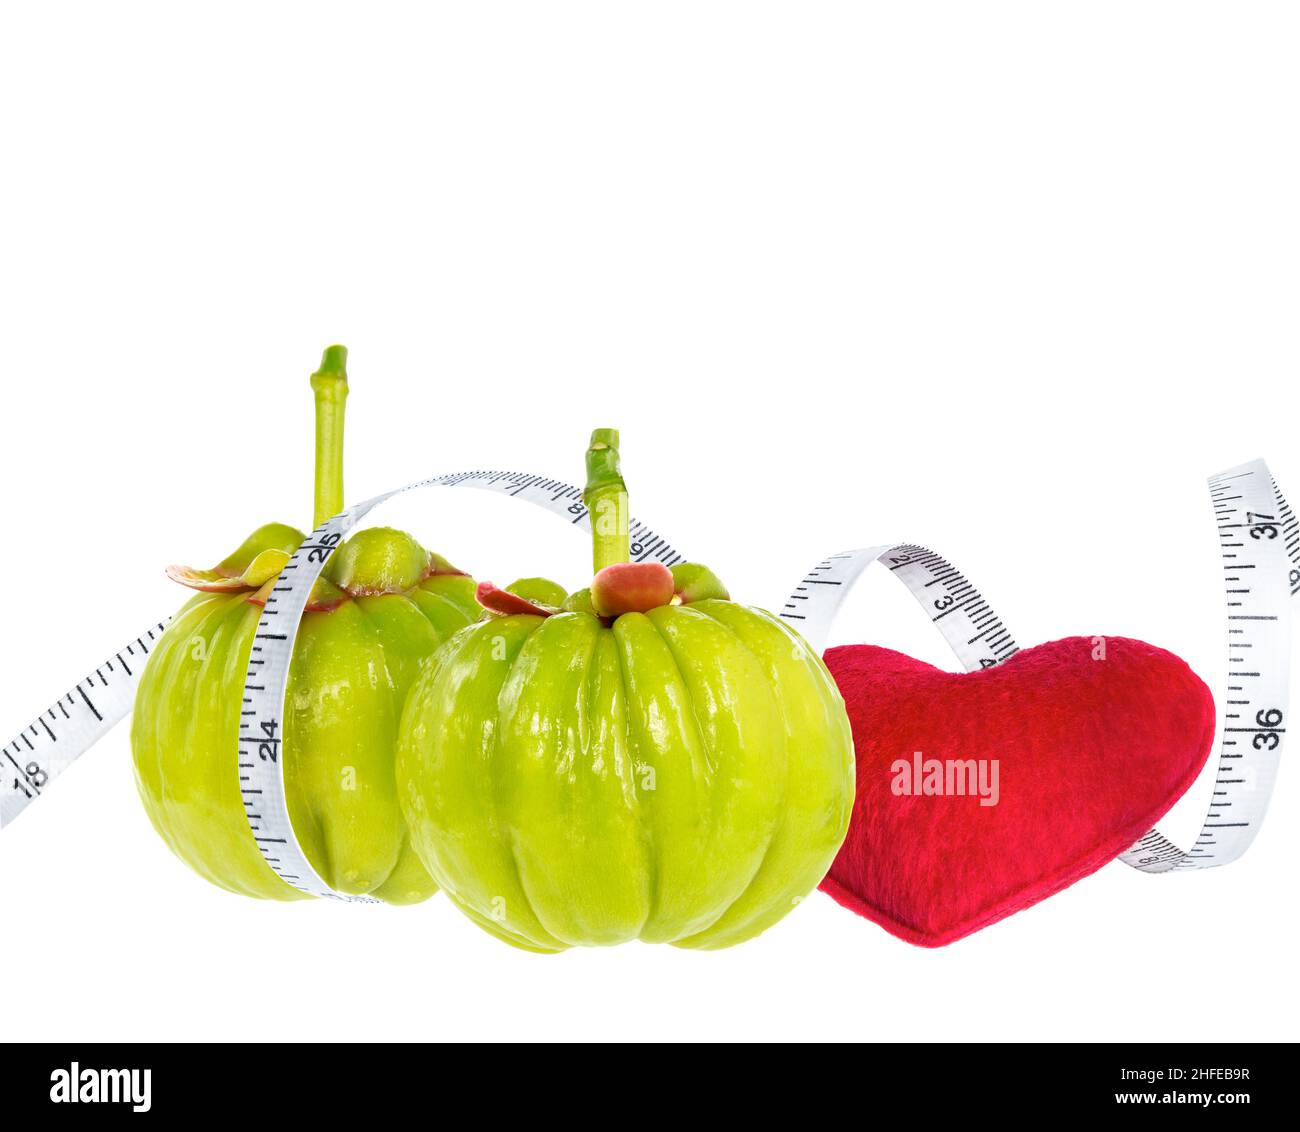 Garcinia cambogia fresh fruit with red heart and measuring tape, isolated on white. Garcinia is spice plants. It helps in the metabolism contain high Stock Photo